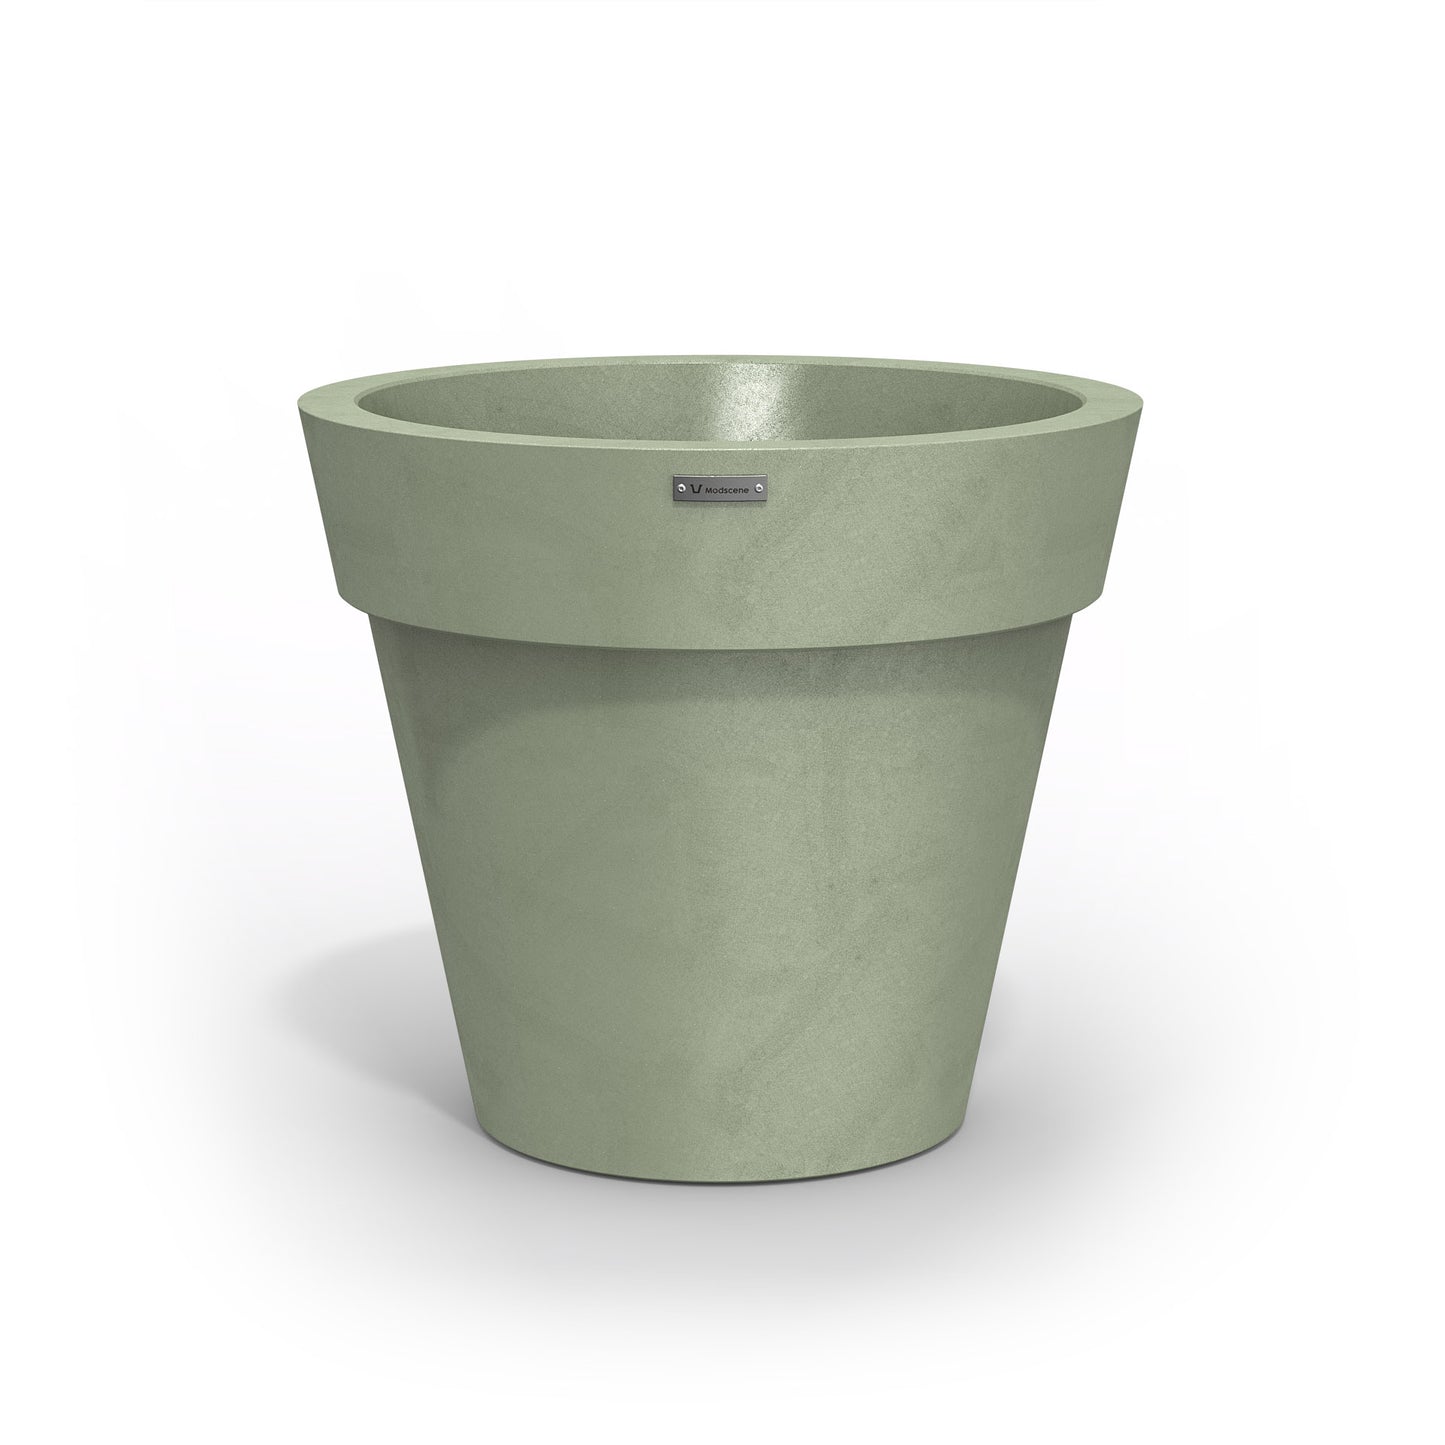 A moss green Modscene plastic planter pot with a concrete look finish.